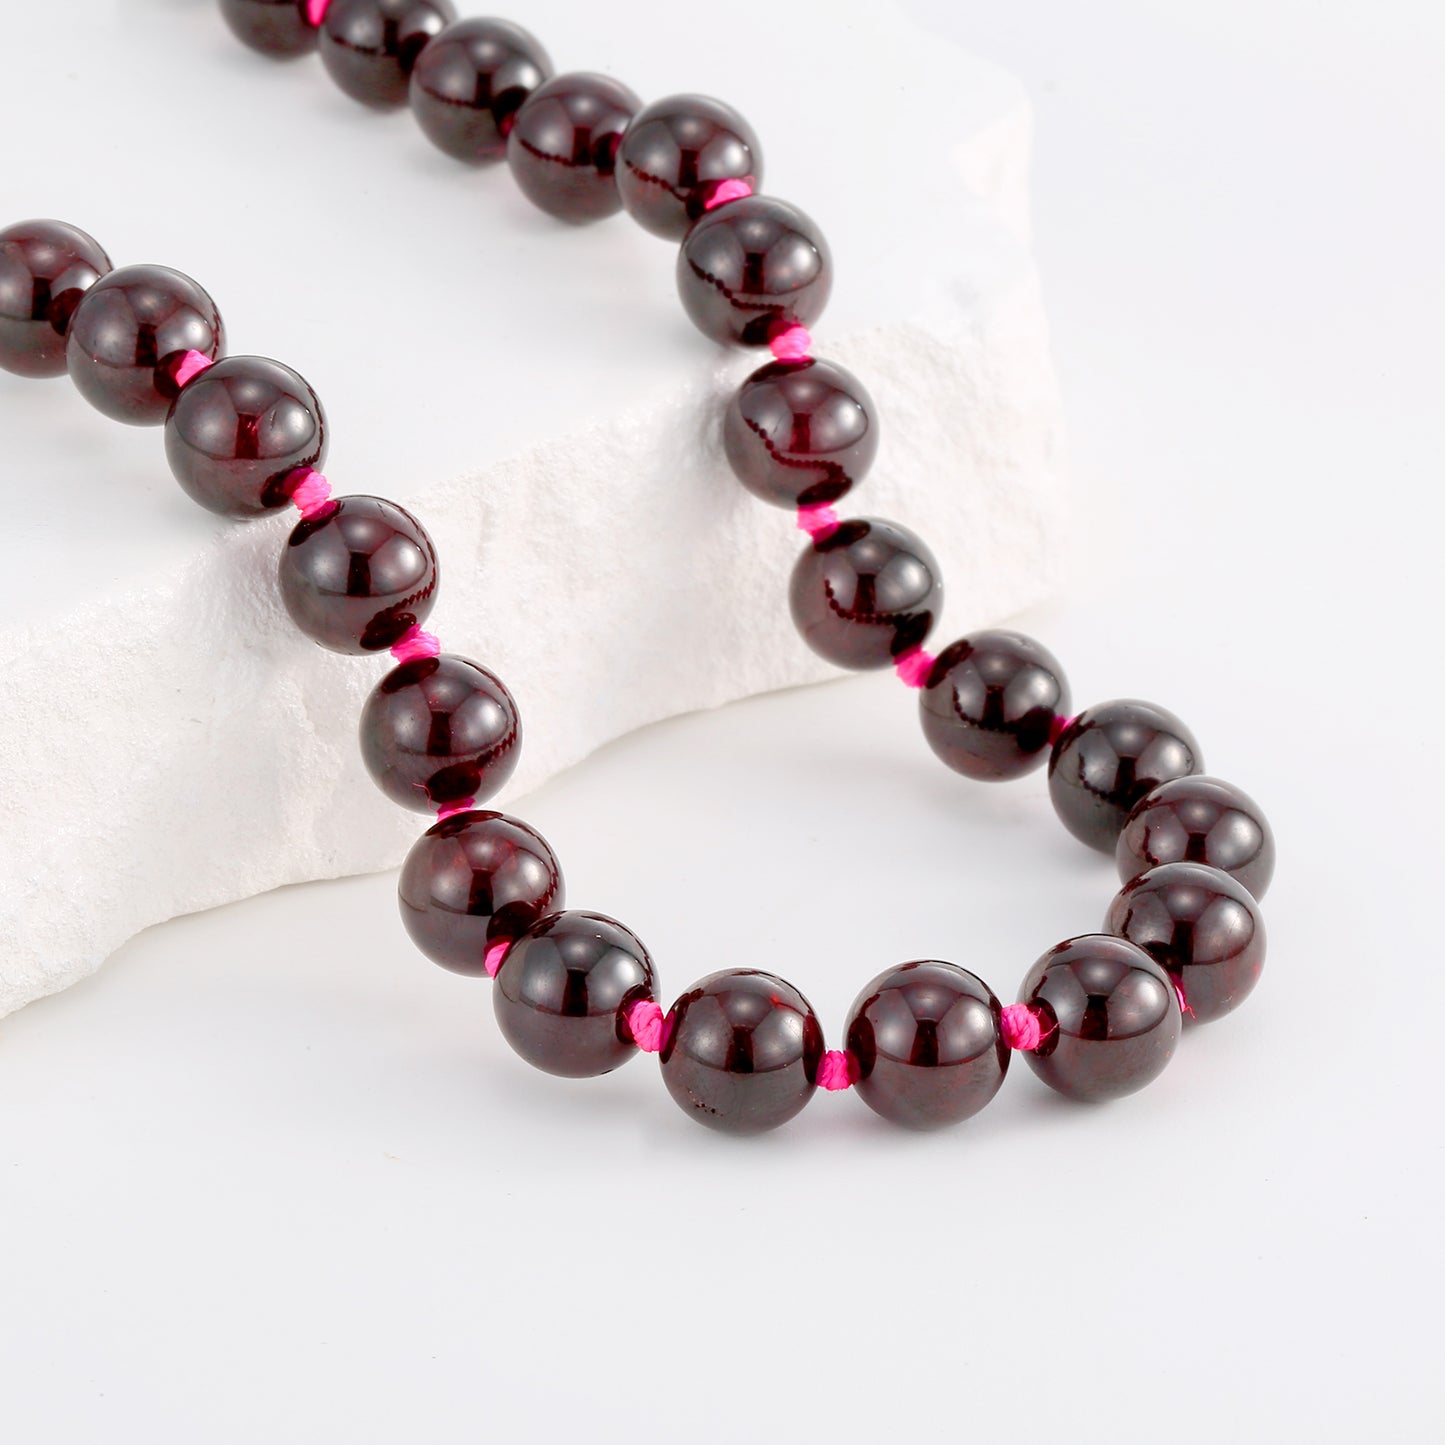 500Ct Red Garnet 20'' Necklace with 10mm Round Beads